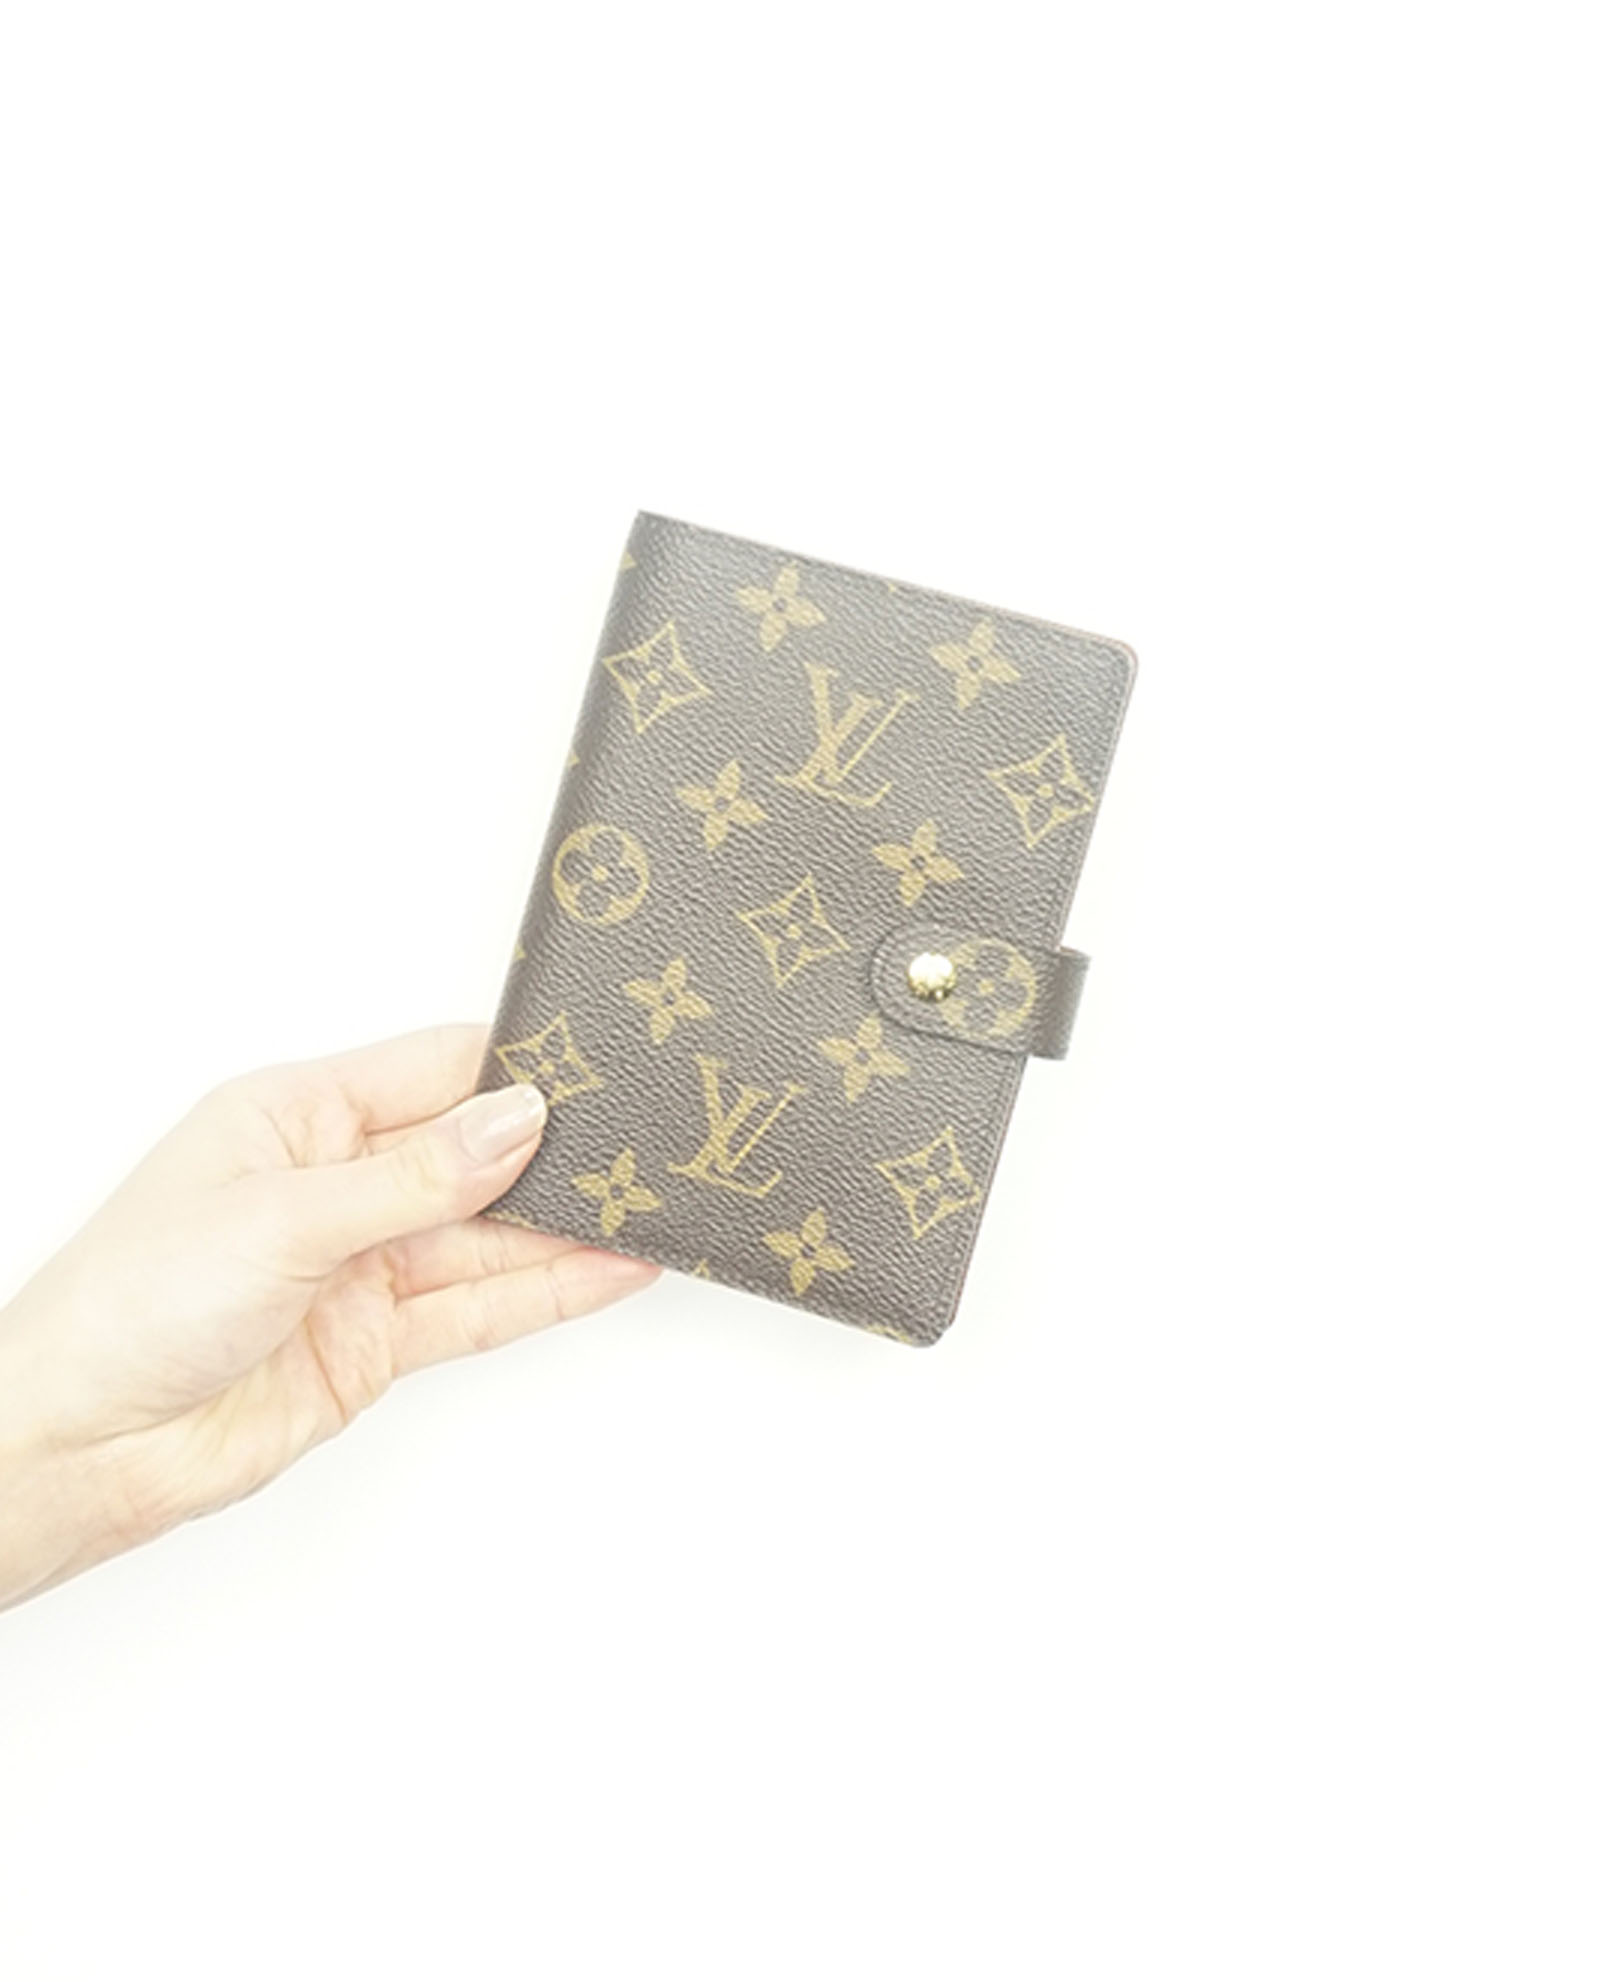 Designer Exchange Ltd - Louis Vuitton SLG's 💞 Browse our incredible  collection of LV Small Leather Goods online now!